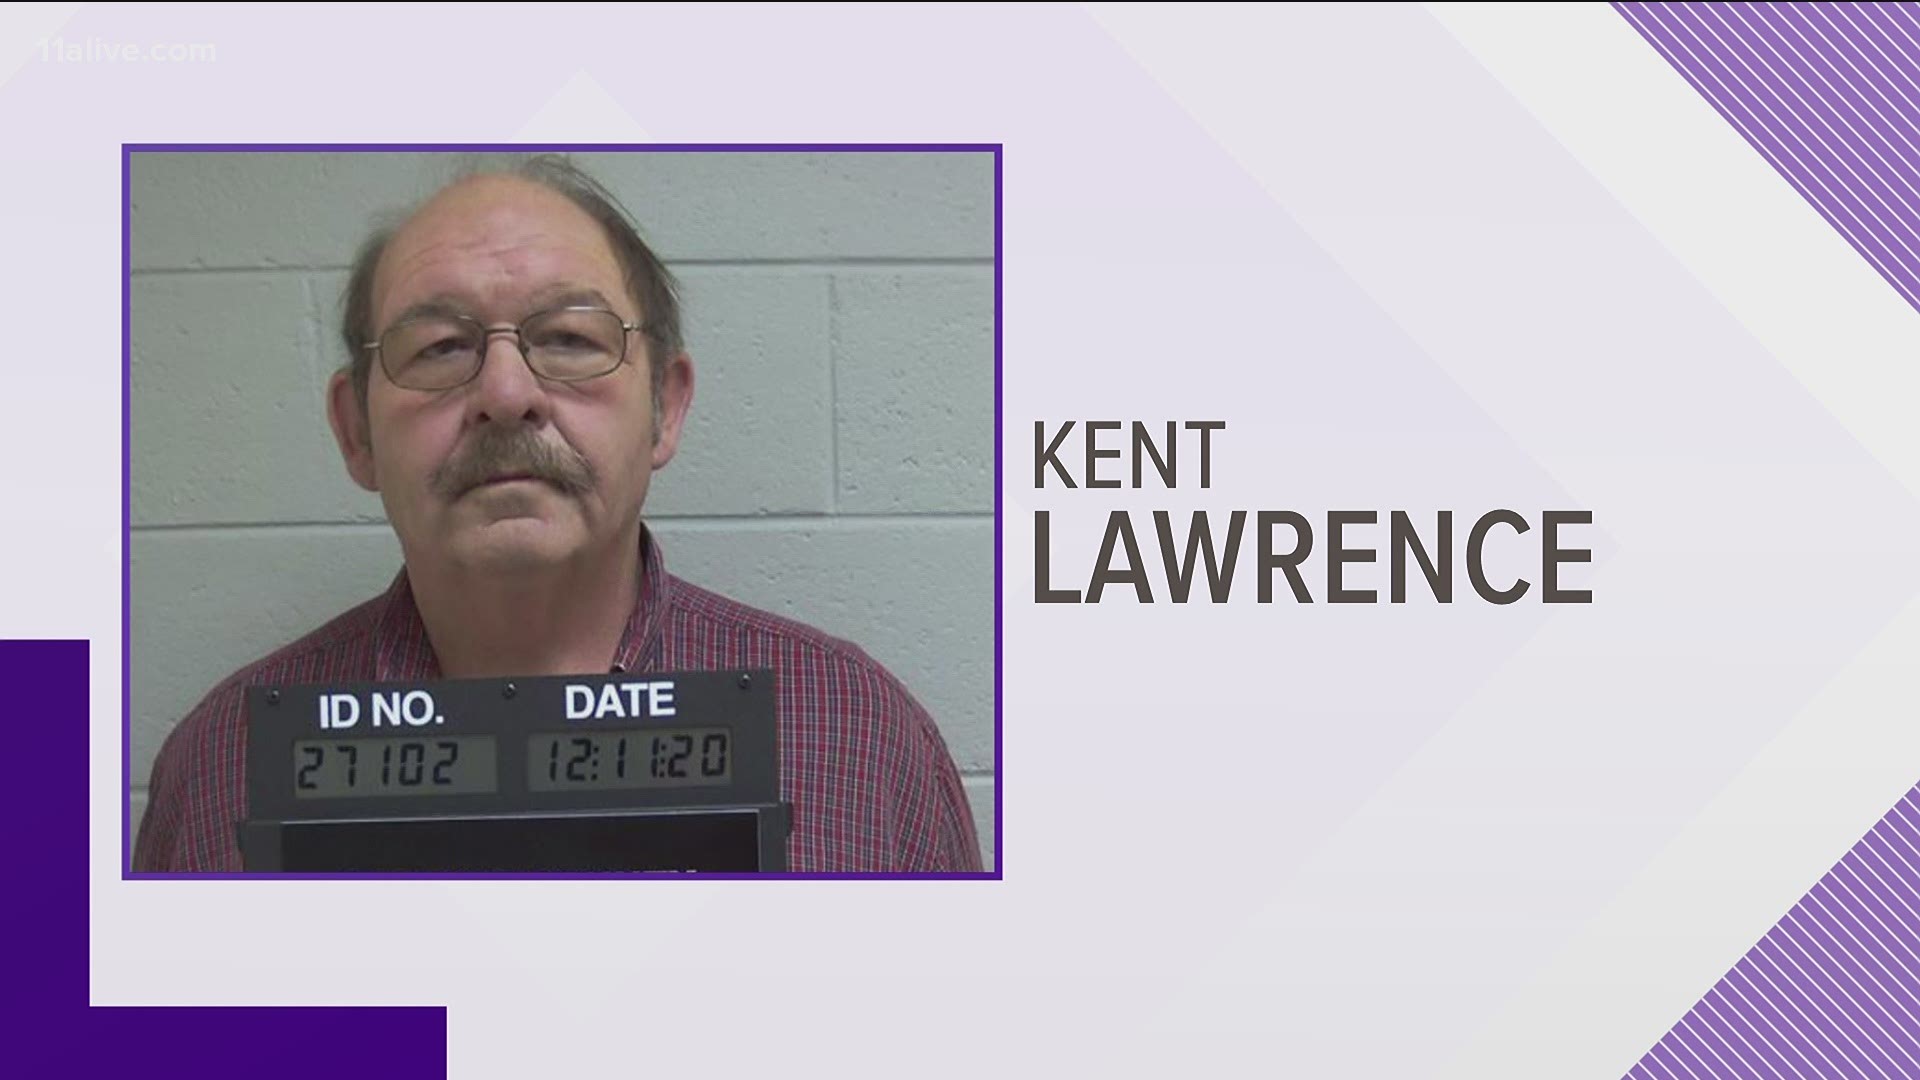 A release from the GBI says Eatonton Police Chief Kent Lawrence used excessive force against the woman, who was handcuffed at the time.